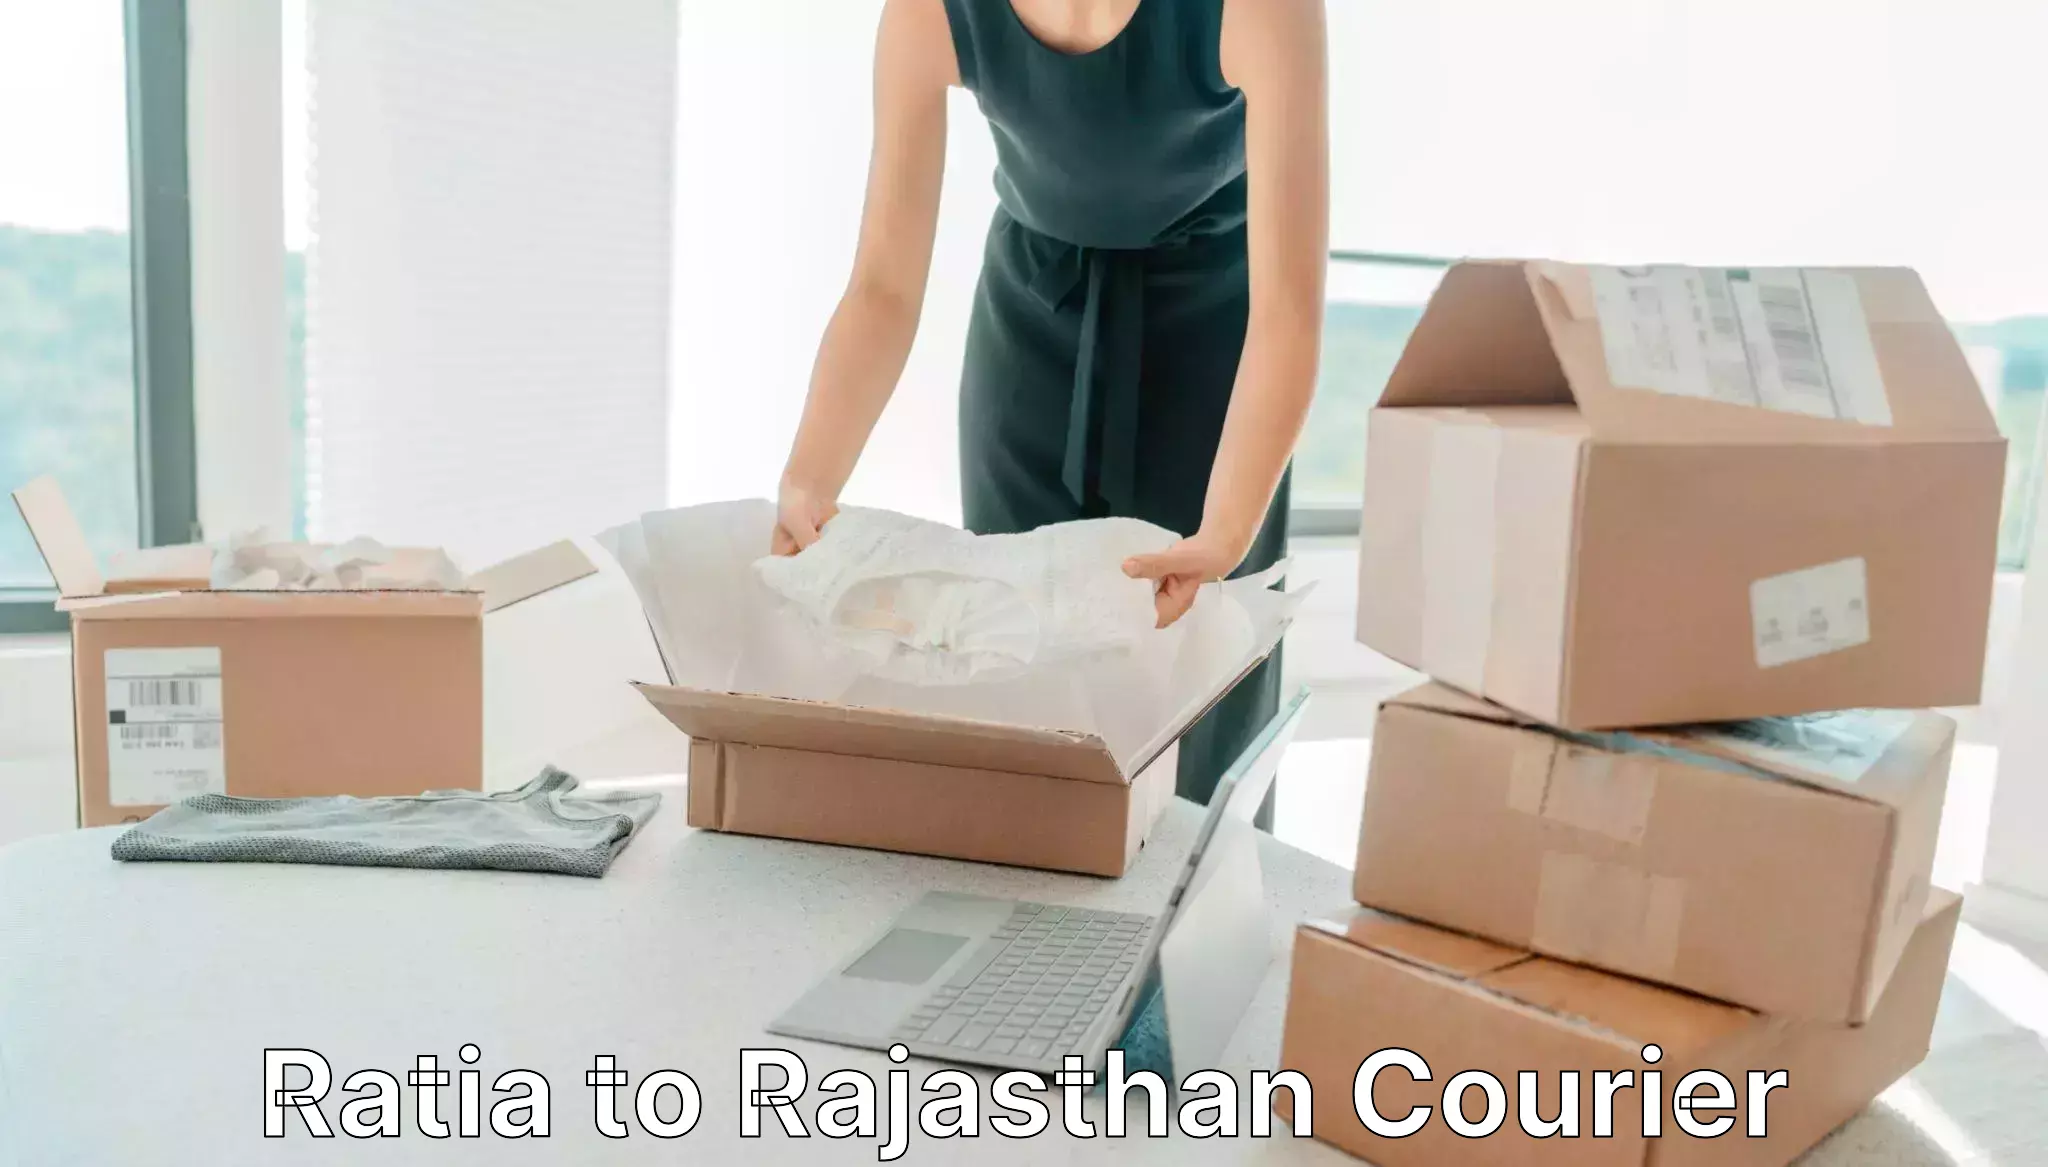 User-friendly delivery service Ratia to Keshoraipatan